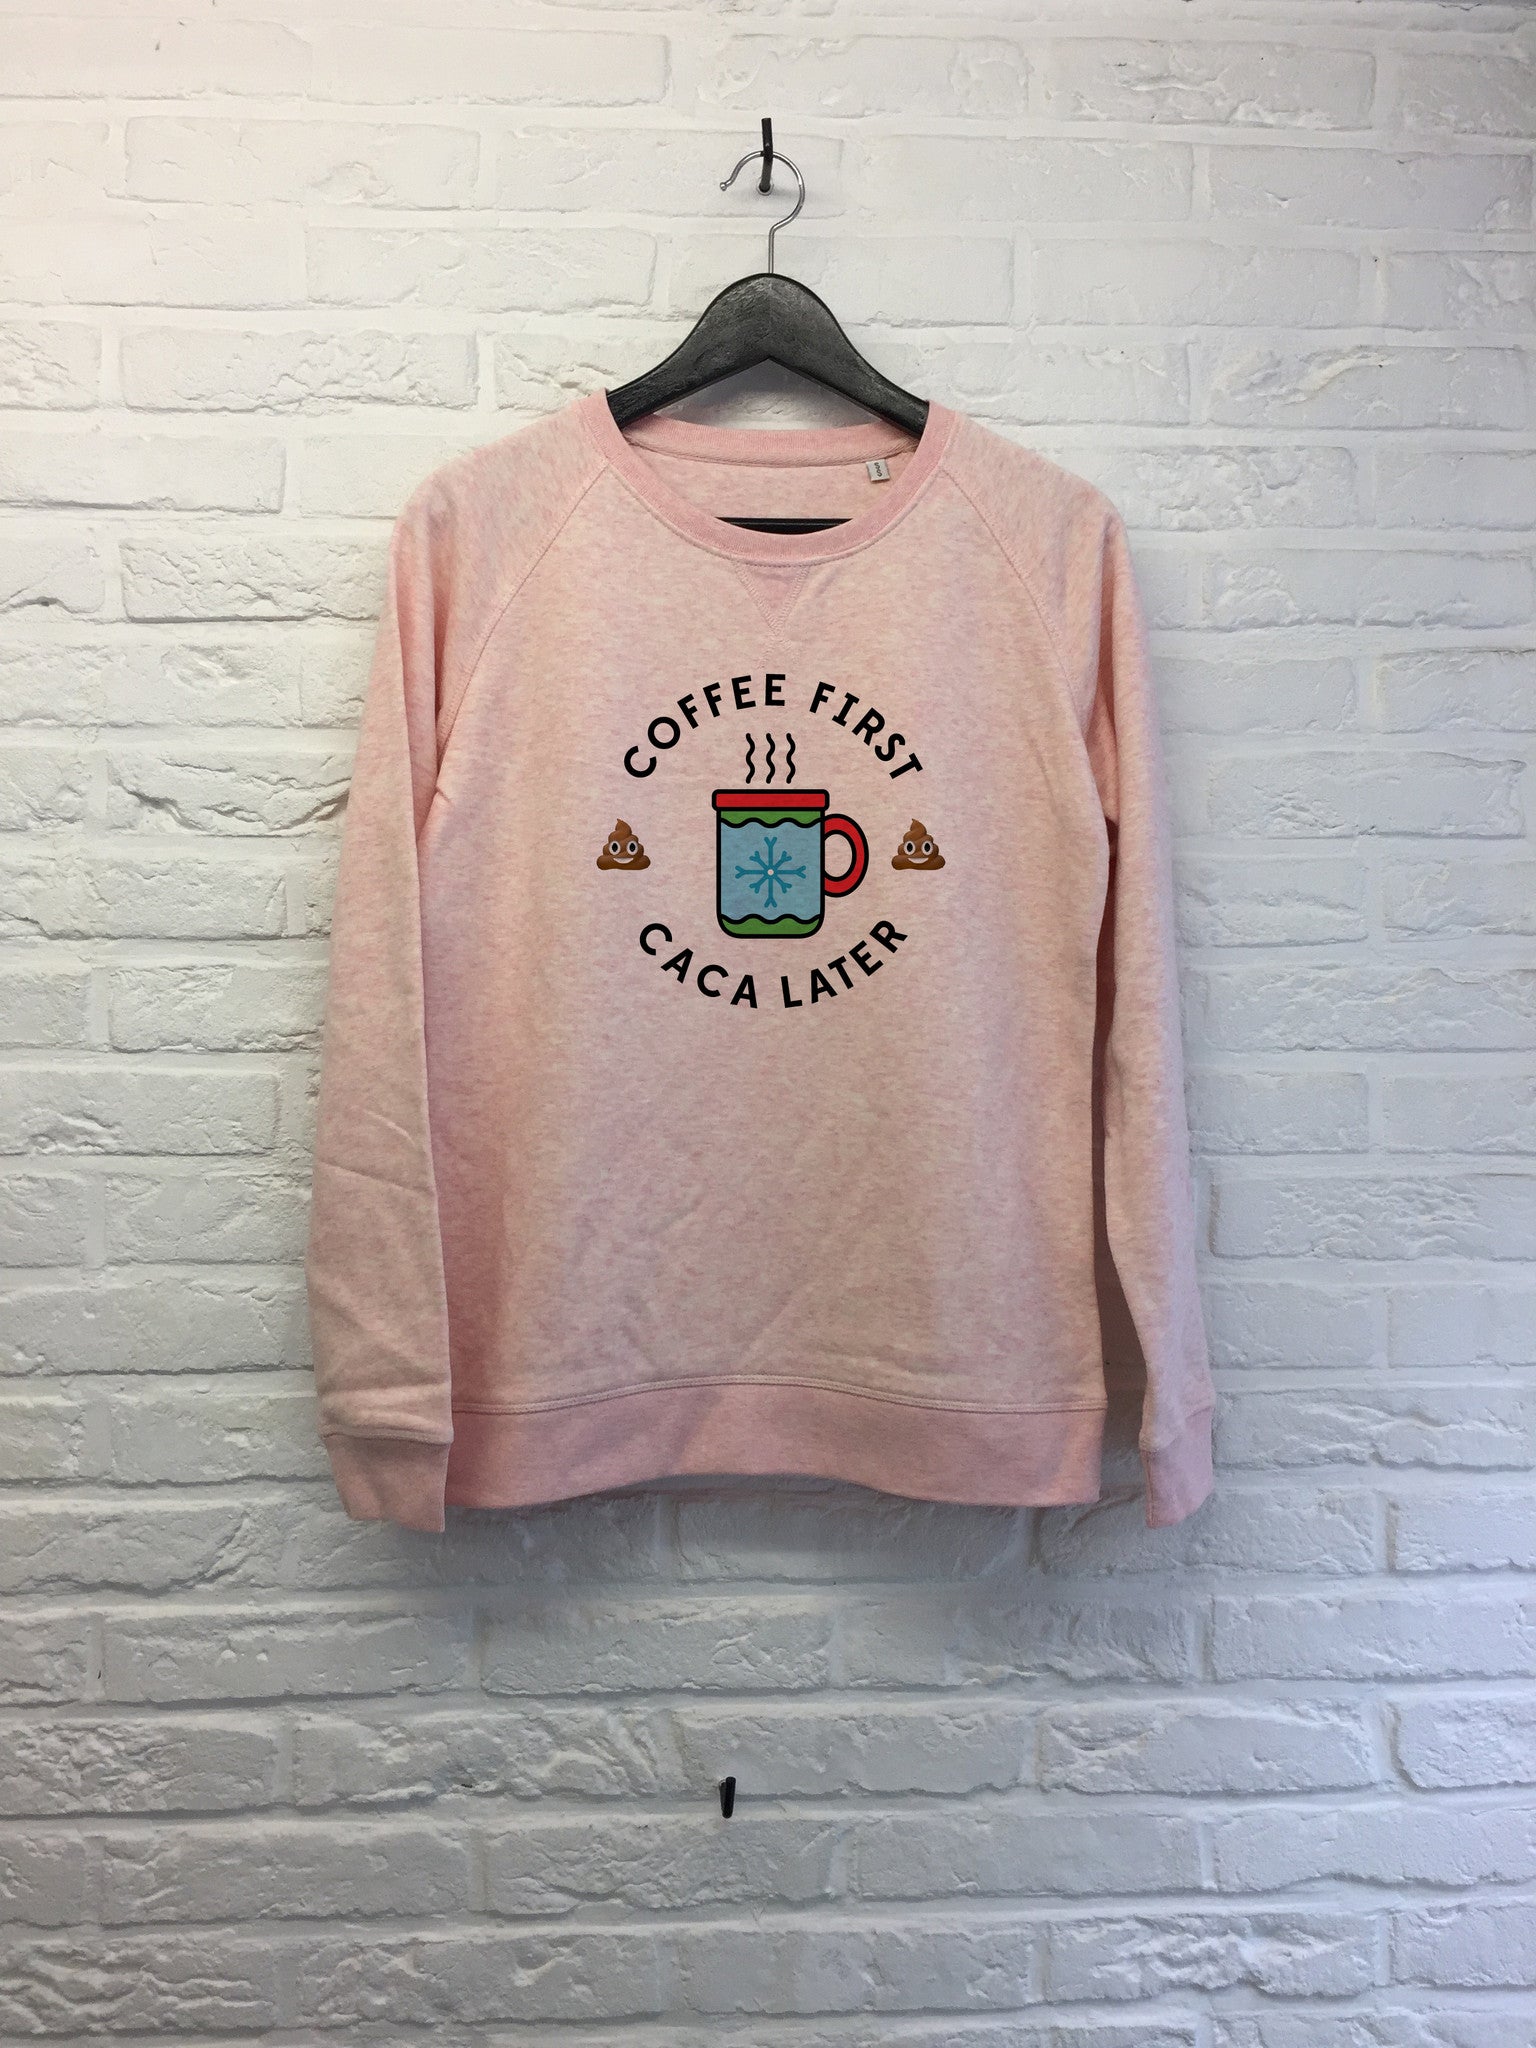 Coffee first Caca later - Sweat - Femme-Sweat shirts-Atelier Amelot